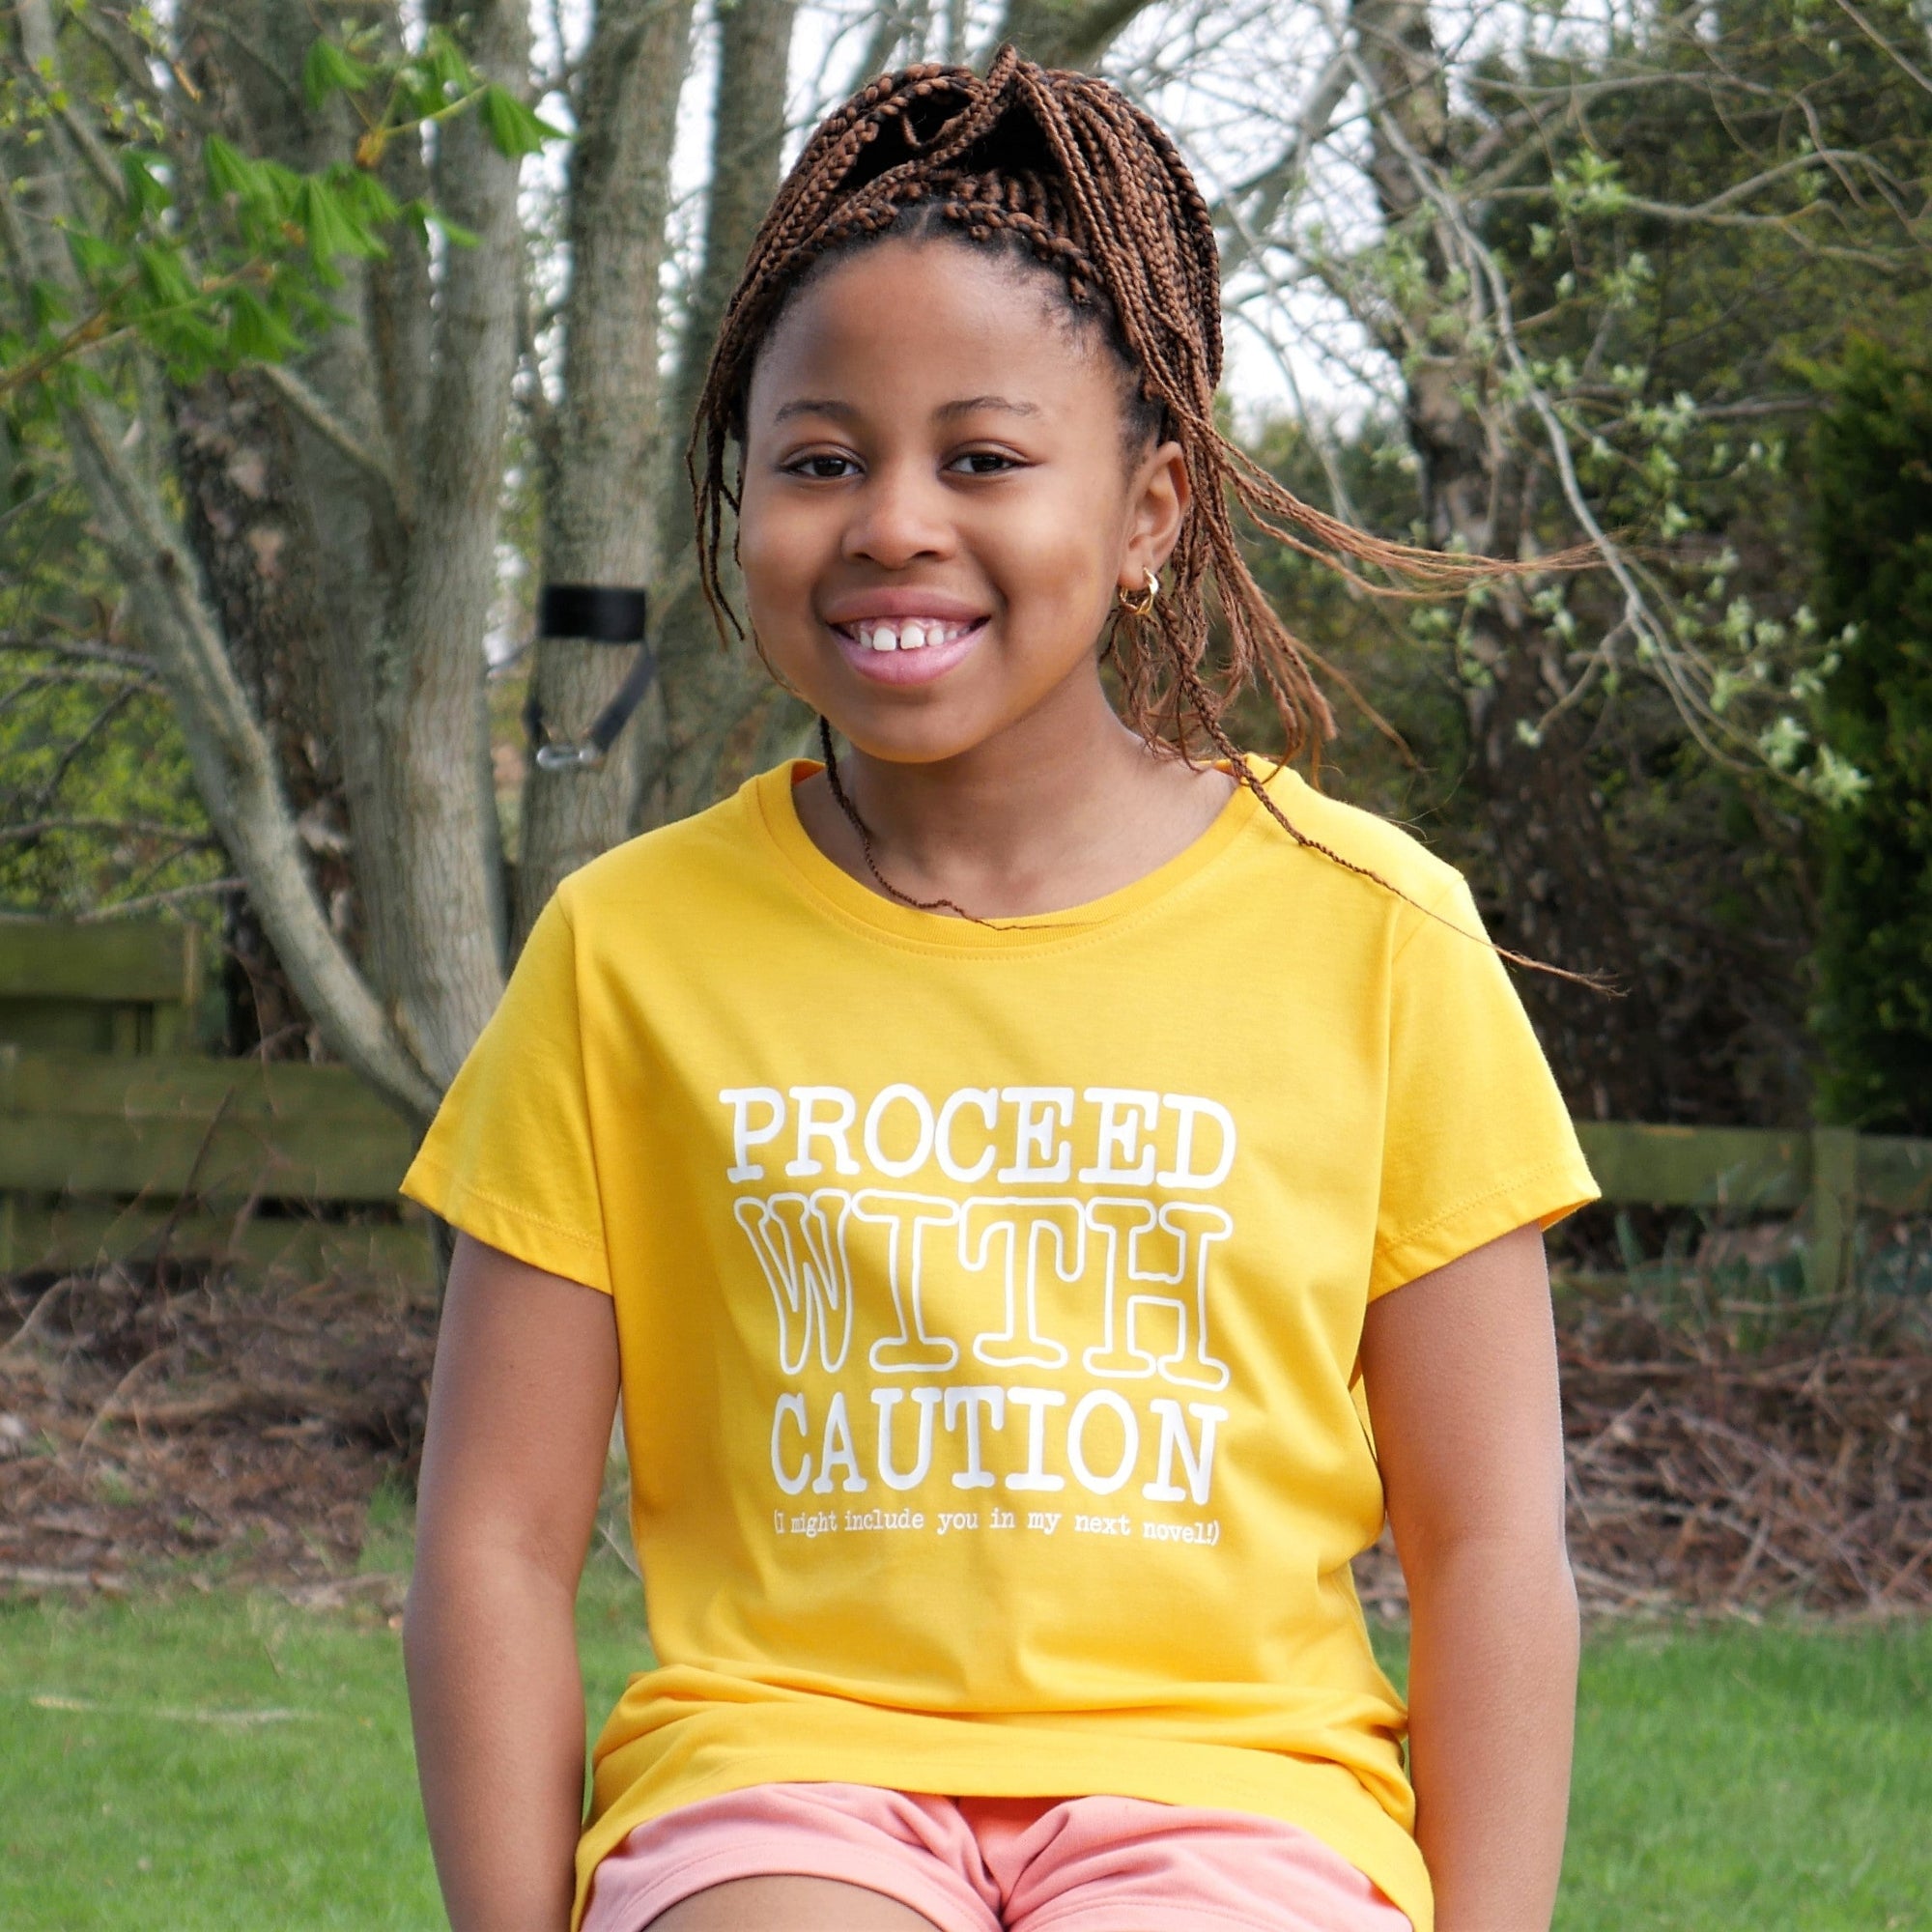 Proceed With Caution! (Literature) Organic Cotton Girls T-Shirt - Scarf Monkey